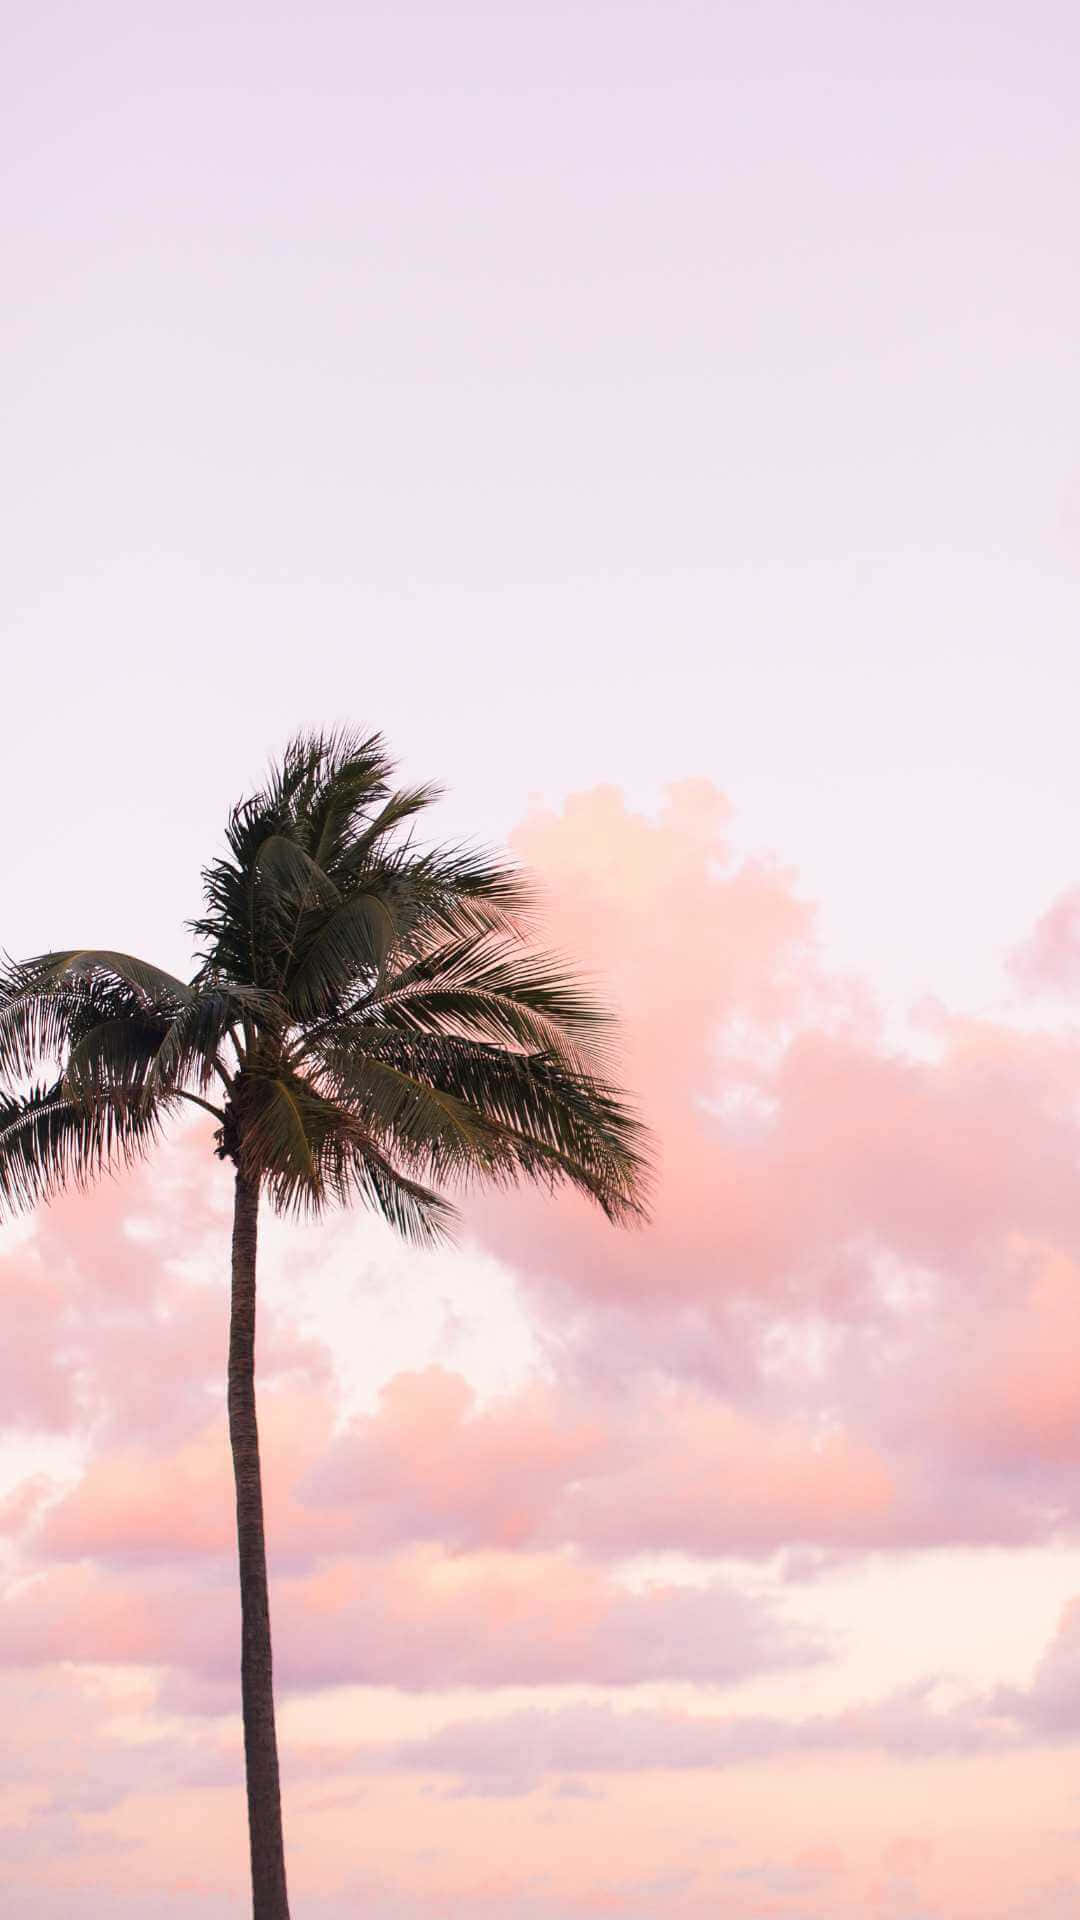 Palm Silhouette Pink Sunset Sky Wallpaper